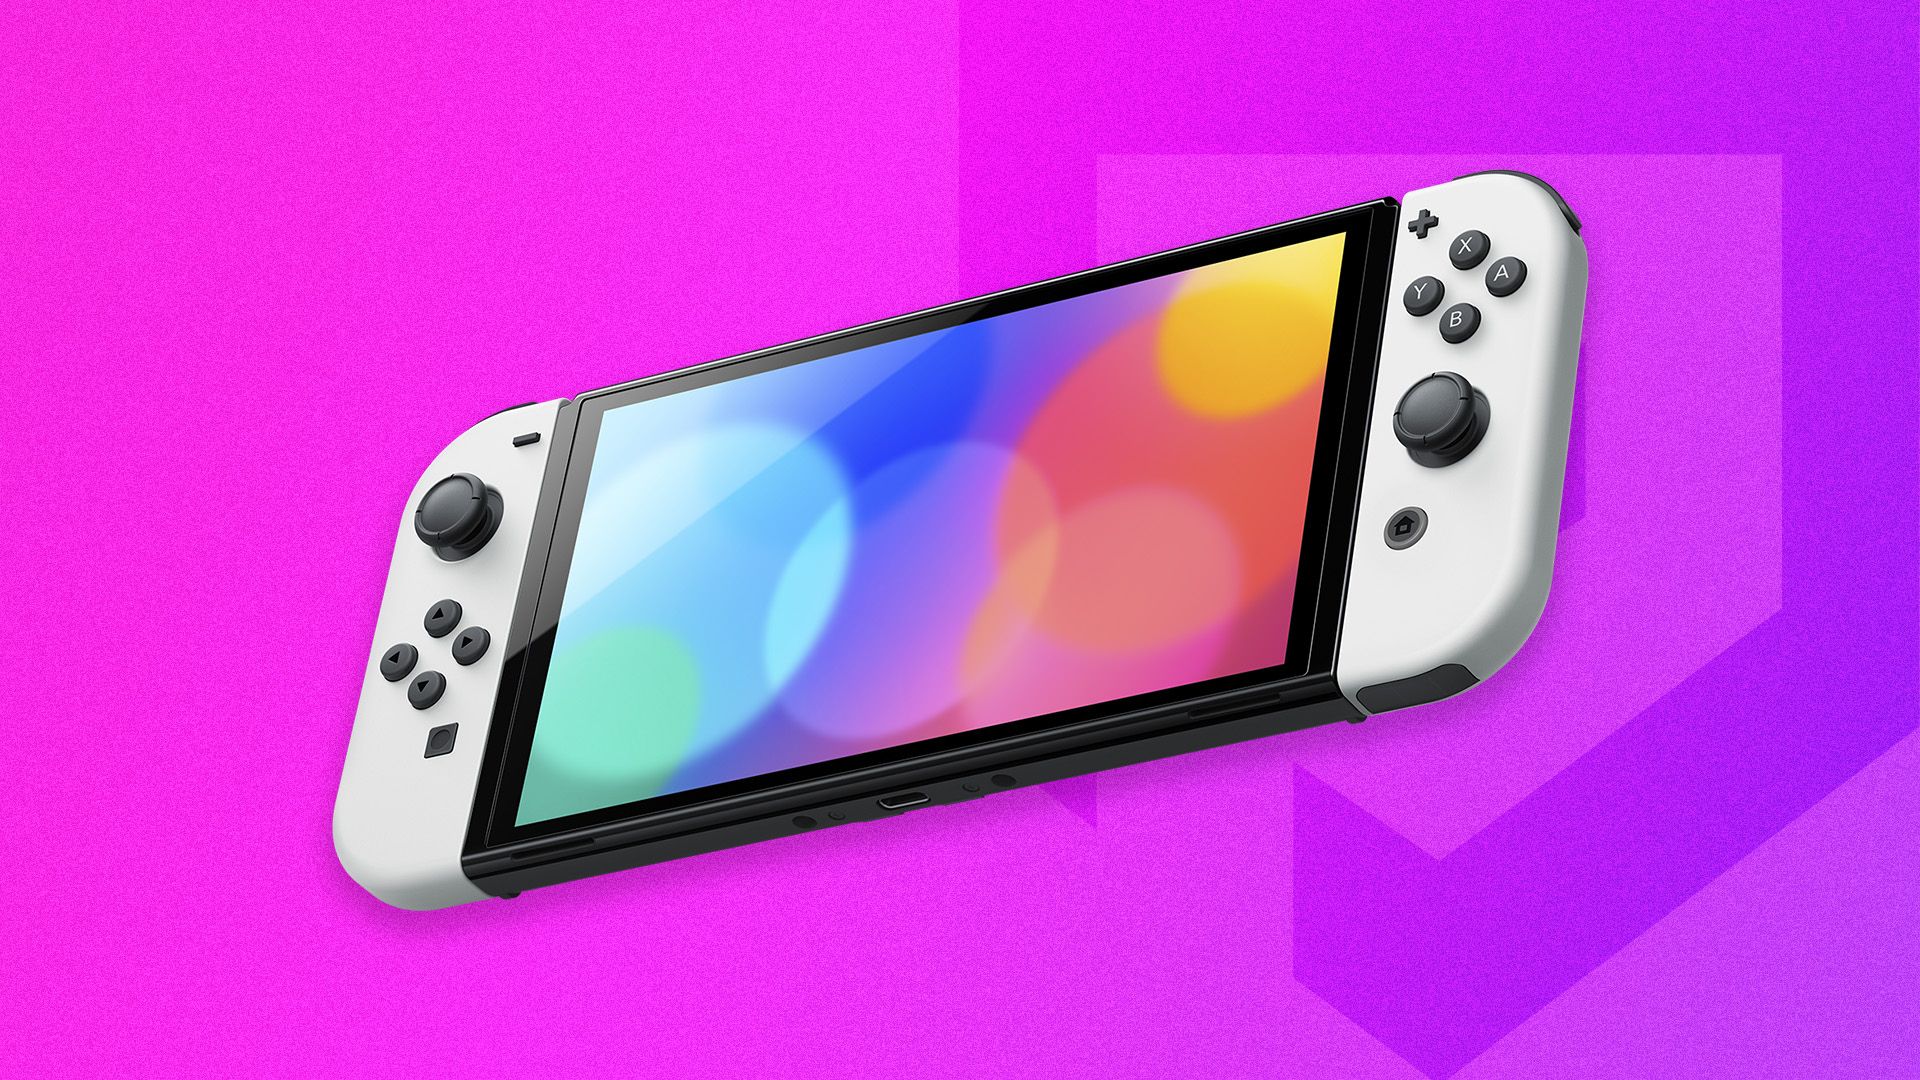 The best games like Among Us on Switch and mobile